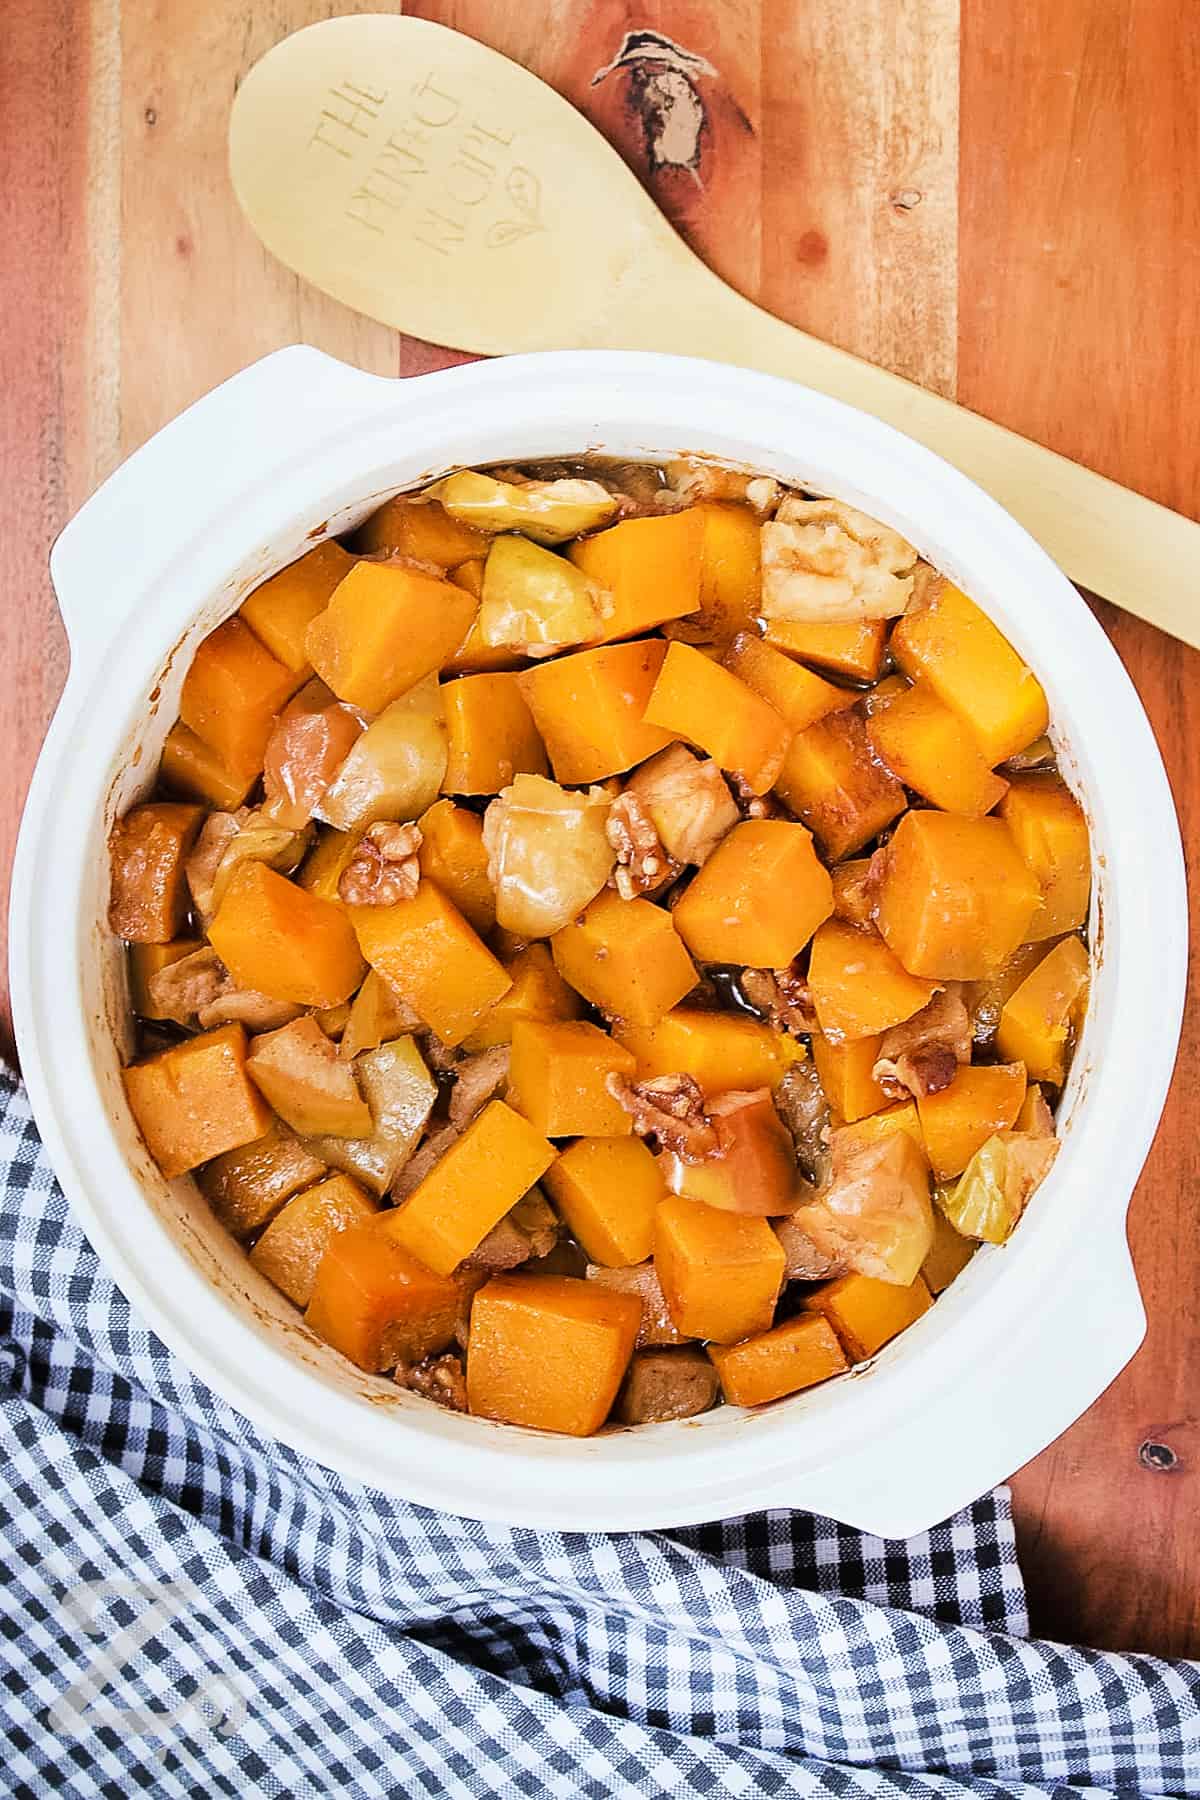 butternut squash casserole in a dish with a wooden spoon on the side